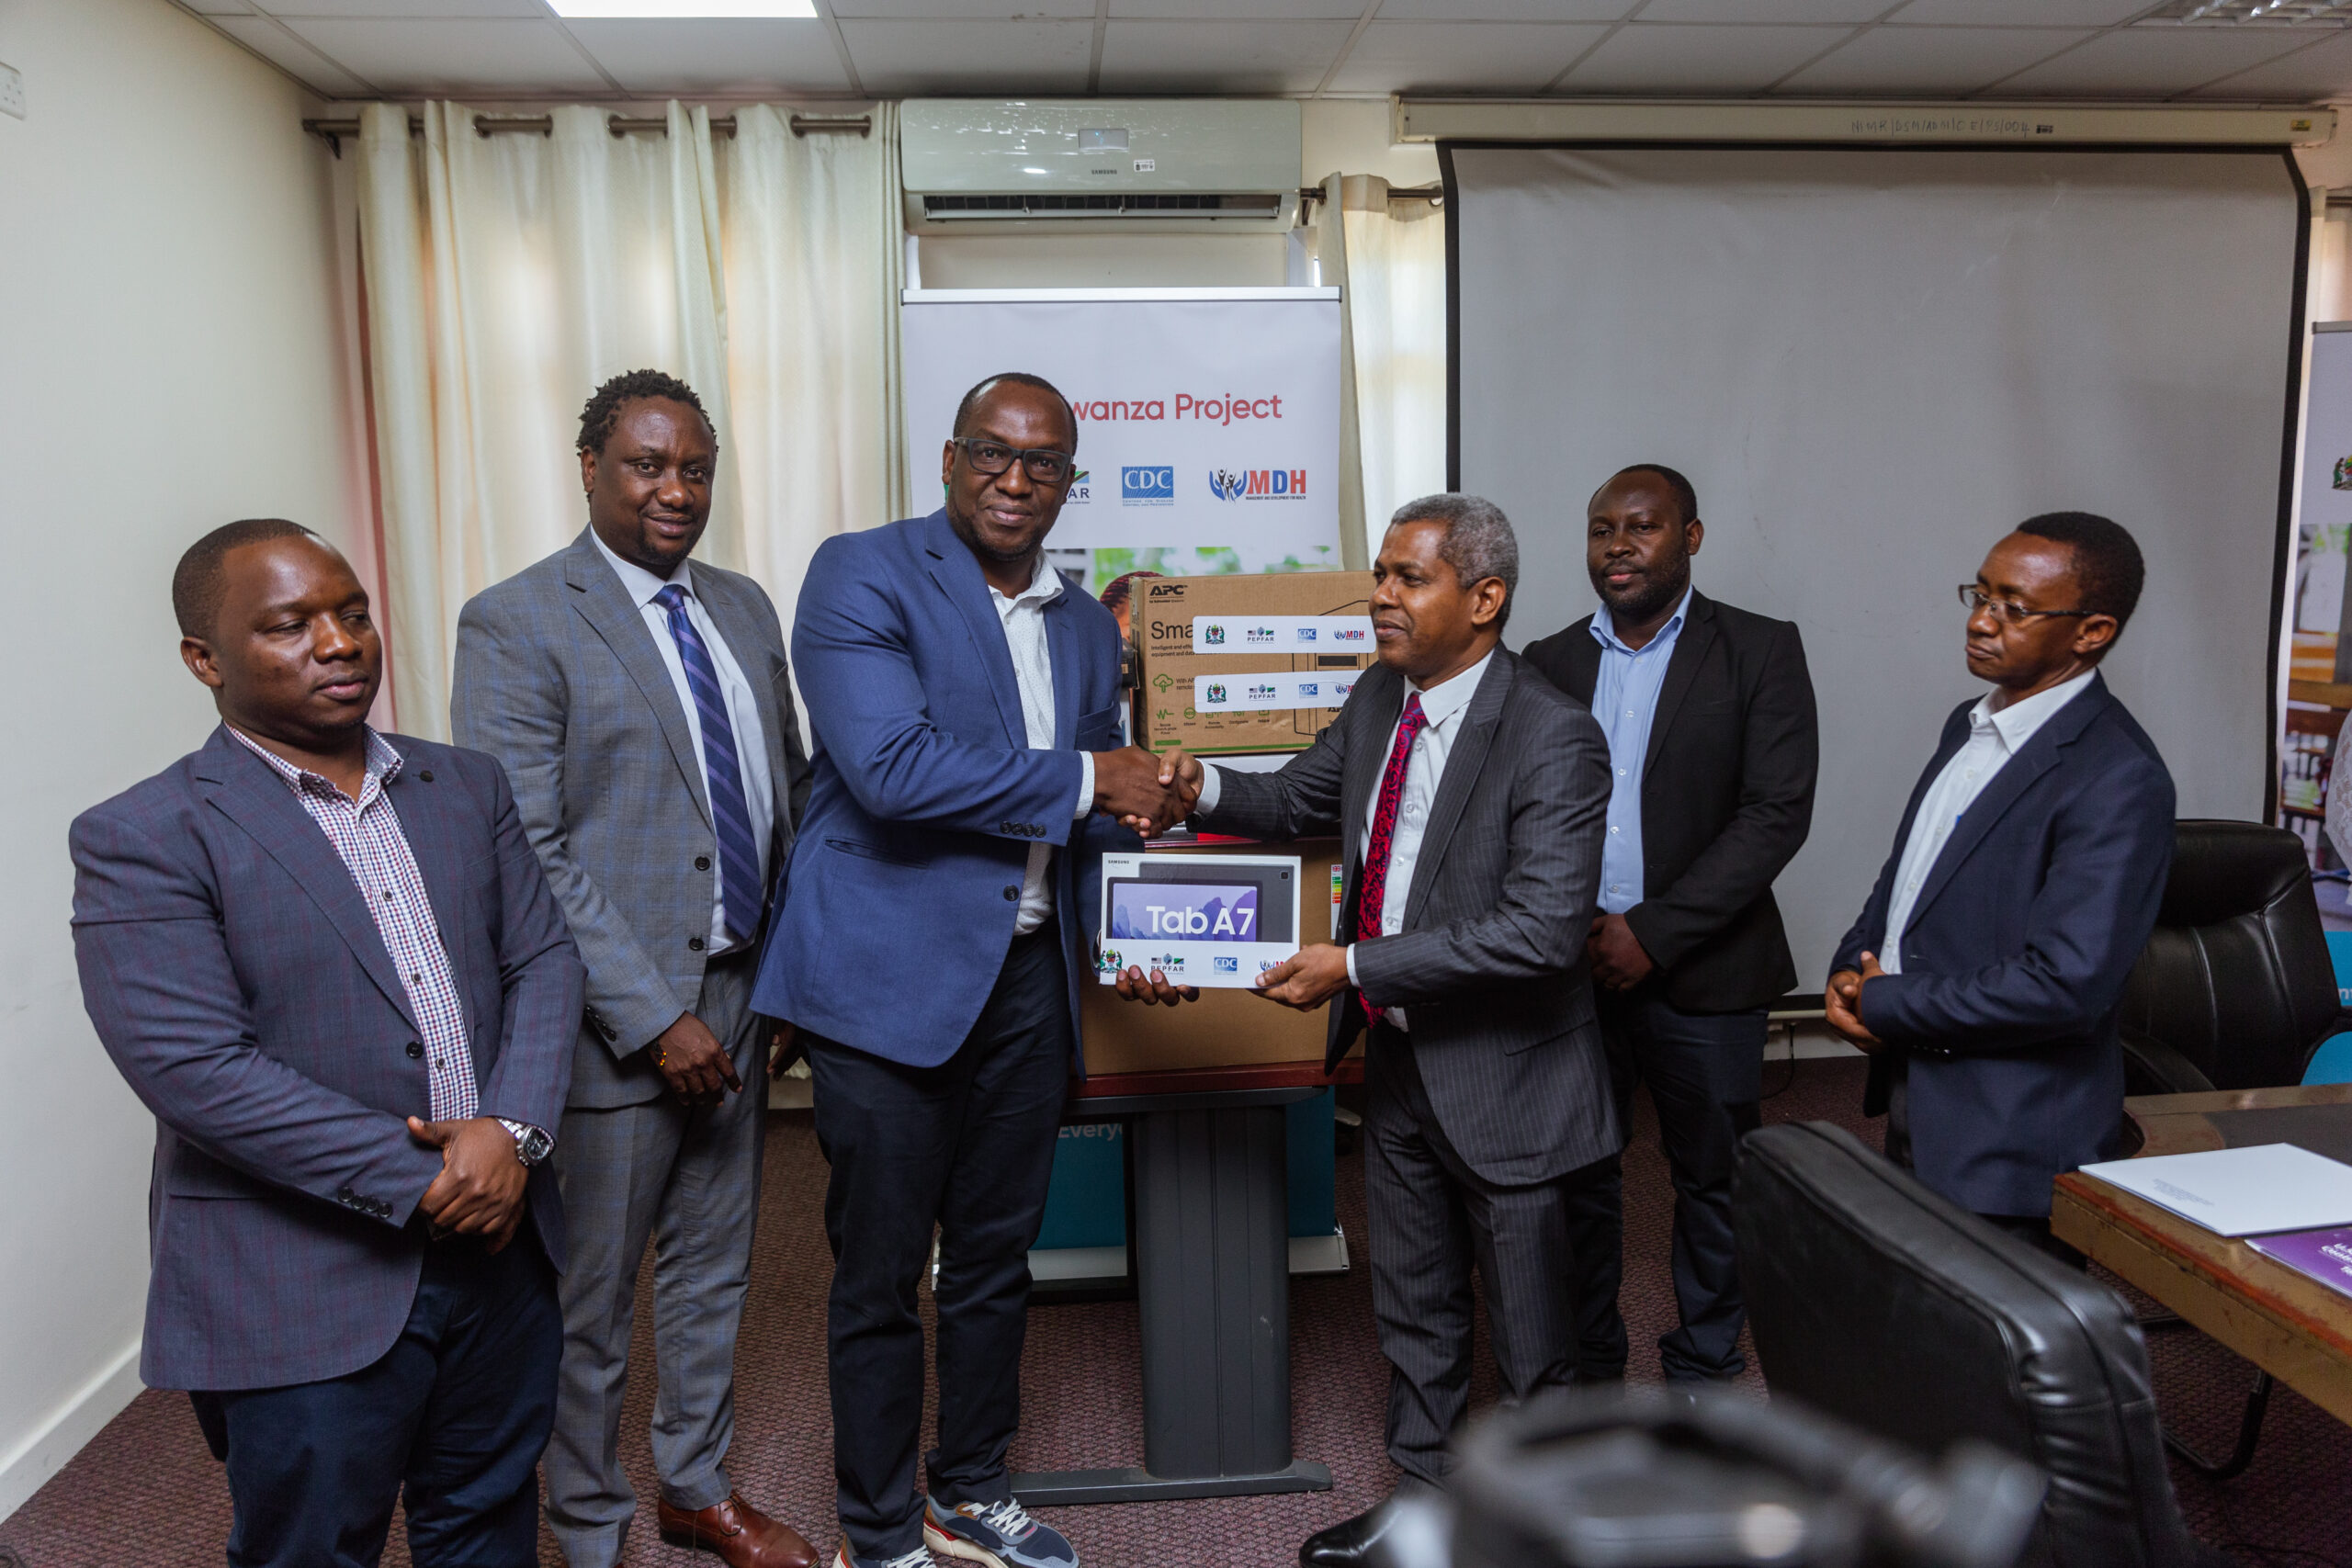 You are currently viewing <strong>Management and Development for Health through the U.S Centers for Disease Control and Prevention – Data for Health hands over ICT equipment’s to boost disease surveillance at Tanzania’s borders.</strong>